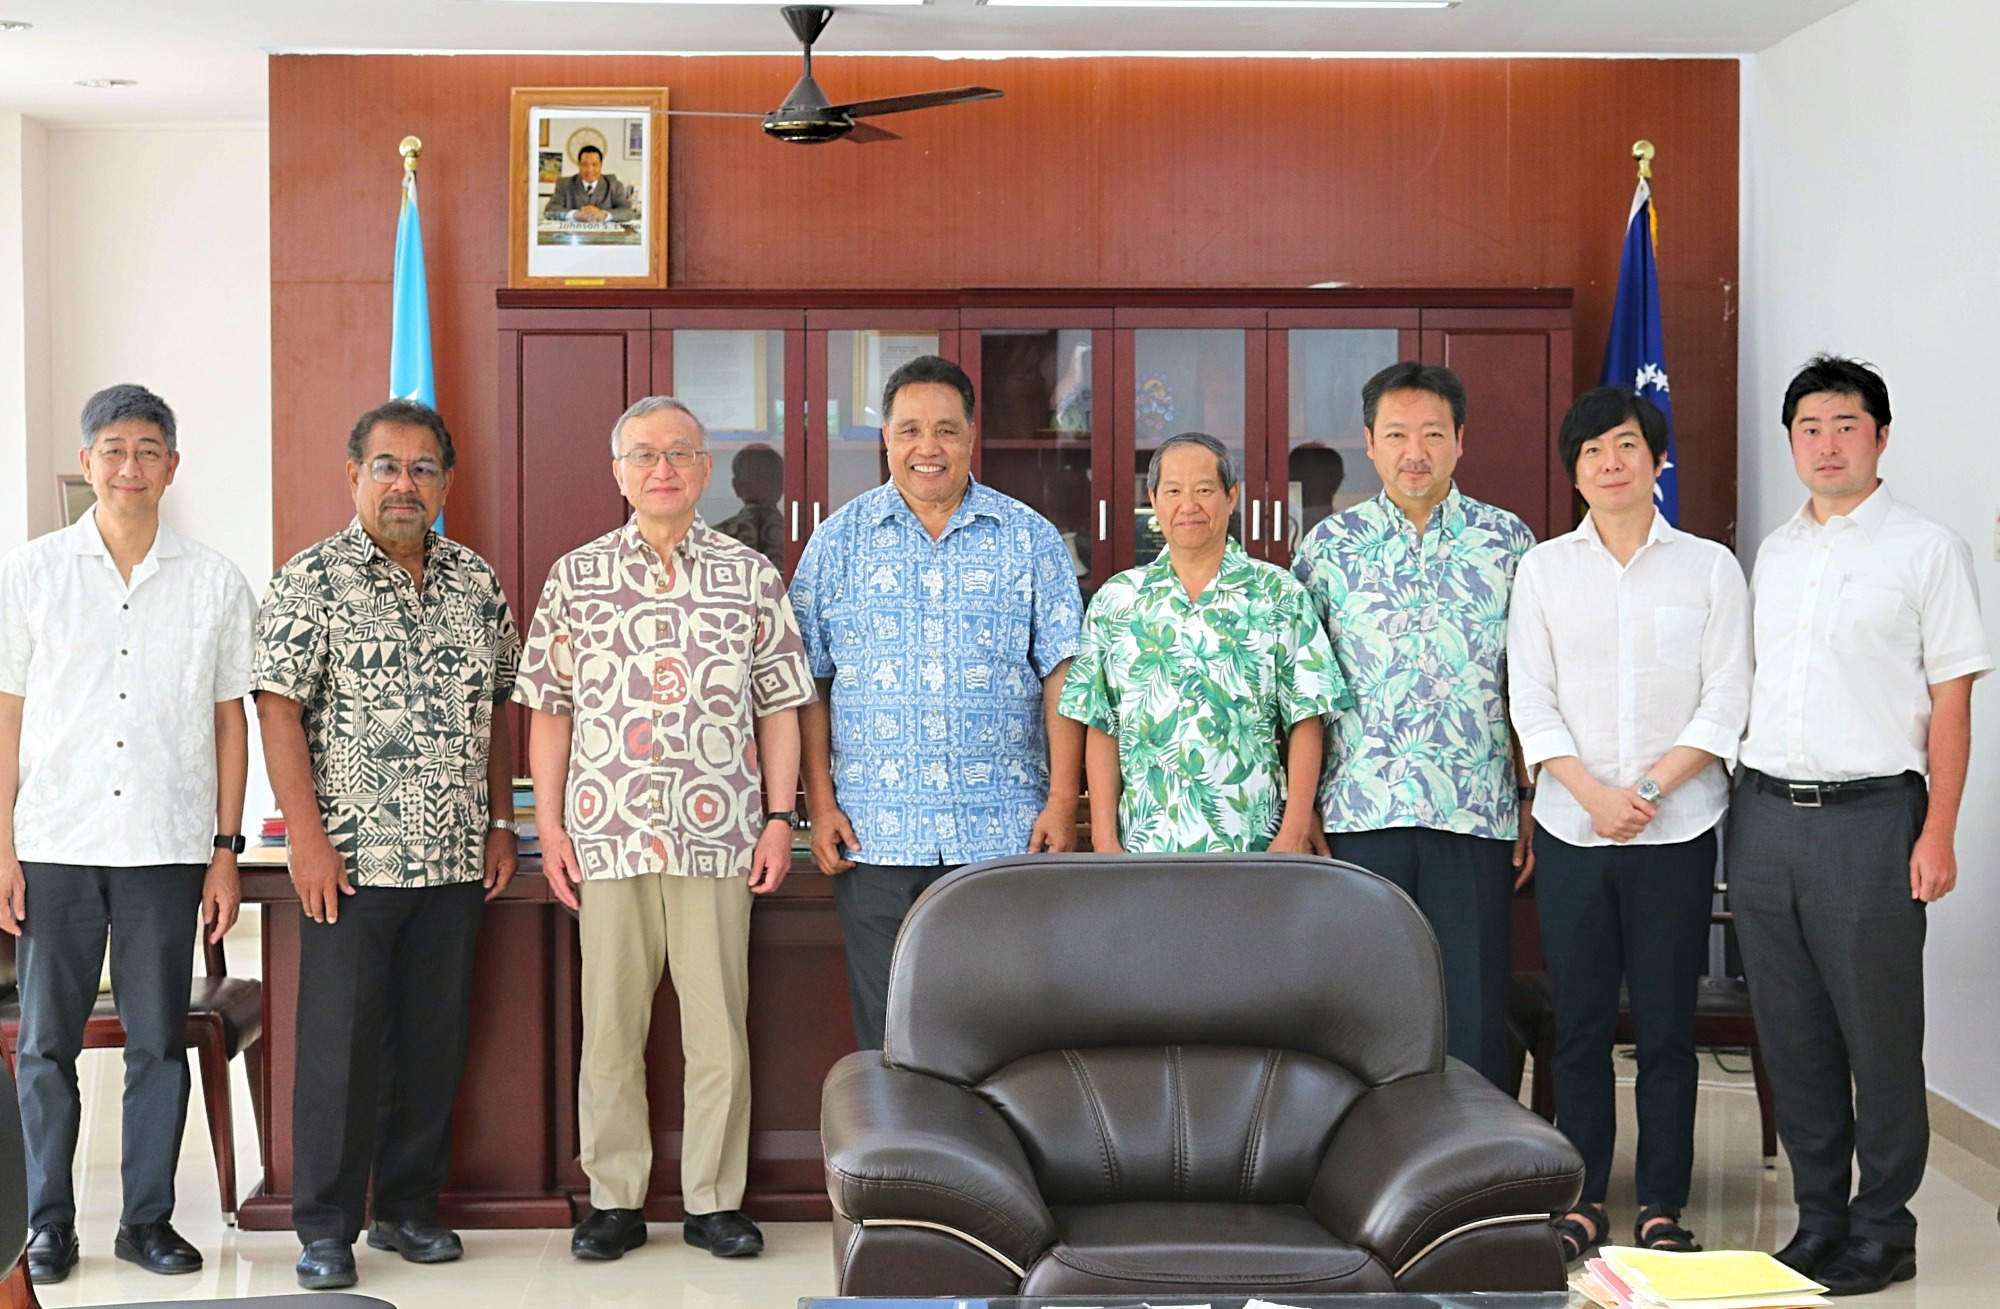 Federated States of Micronesia Tourism Promotion Mission